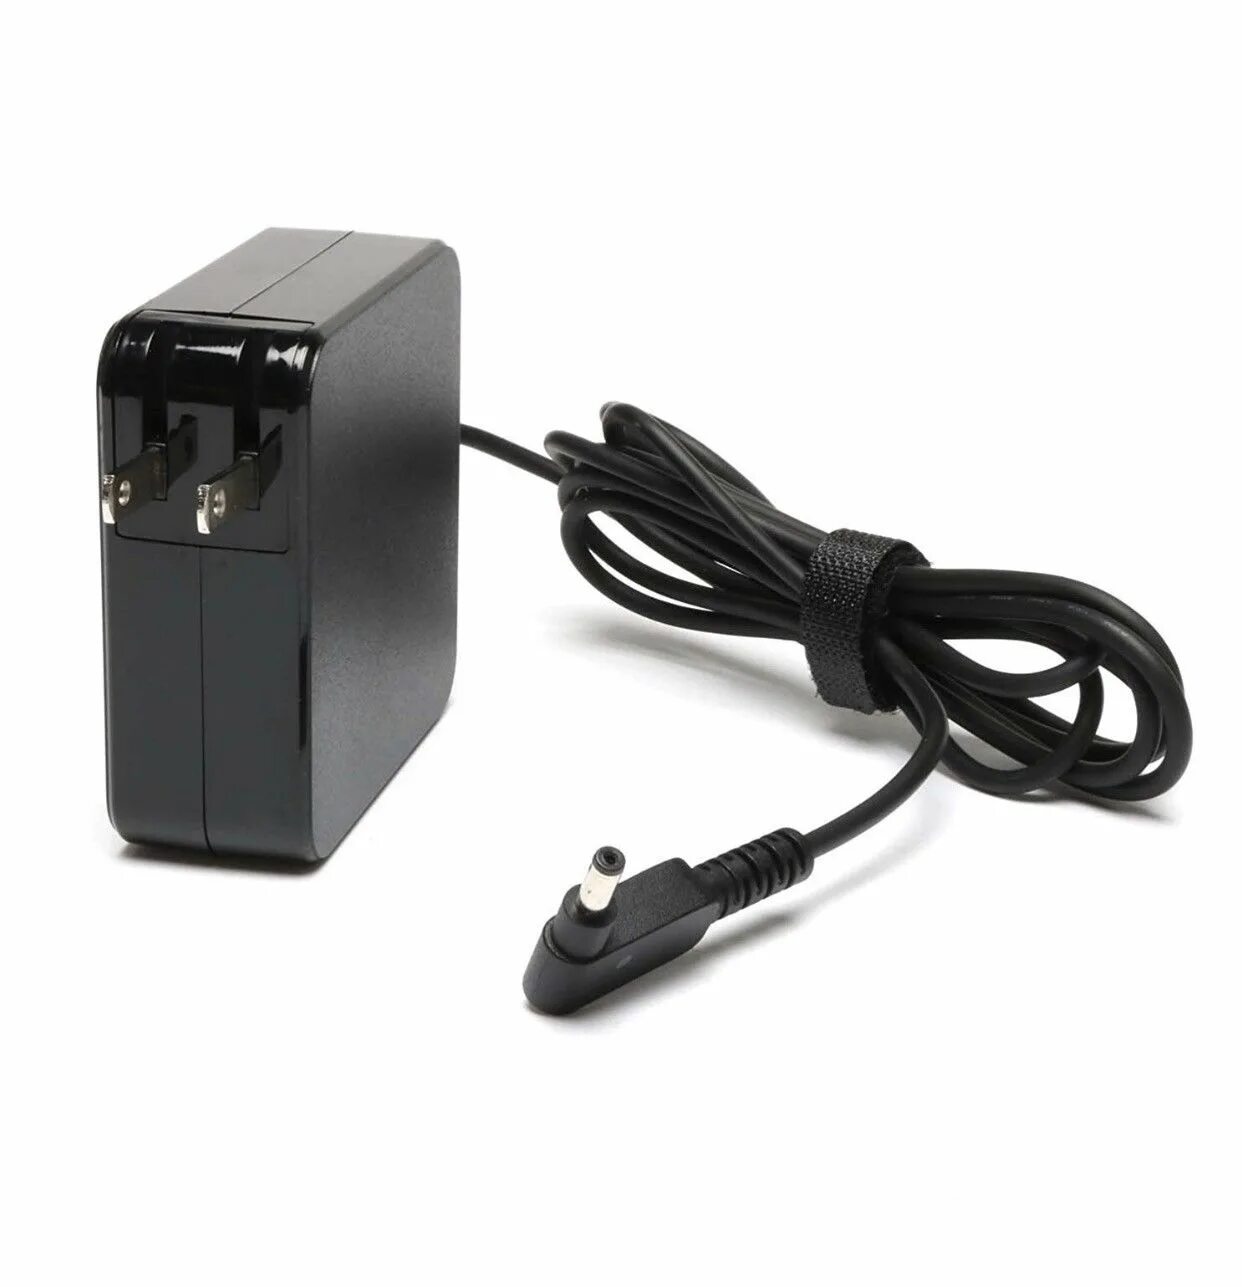 ASUS ux31 зарядное. Адаптер ASUS 19v 3.42a 4*1.35. AC Adapter for ASUS ZENBOOK pa-1650-66 ADP-65aw a 4.0mm*1.35mm 65w Laptop Power. ASUS AC Adapter 65w. Зарядка asus zenbook